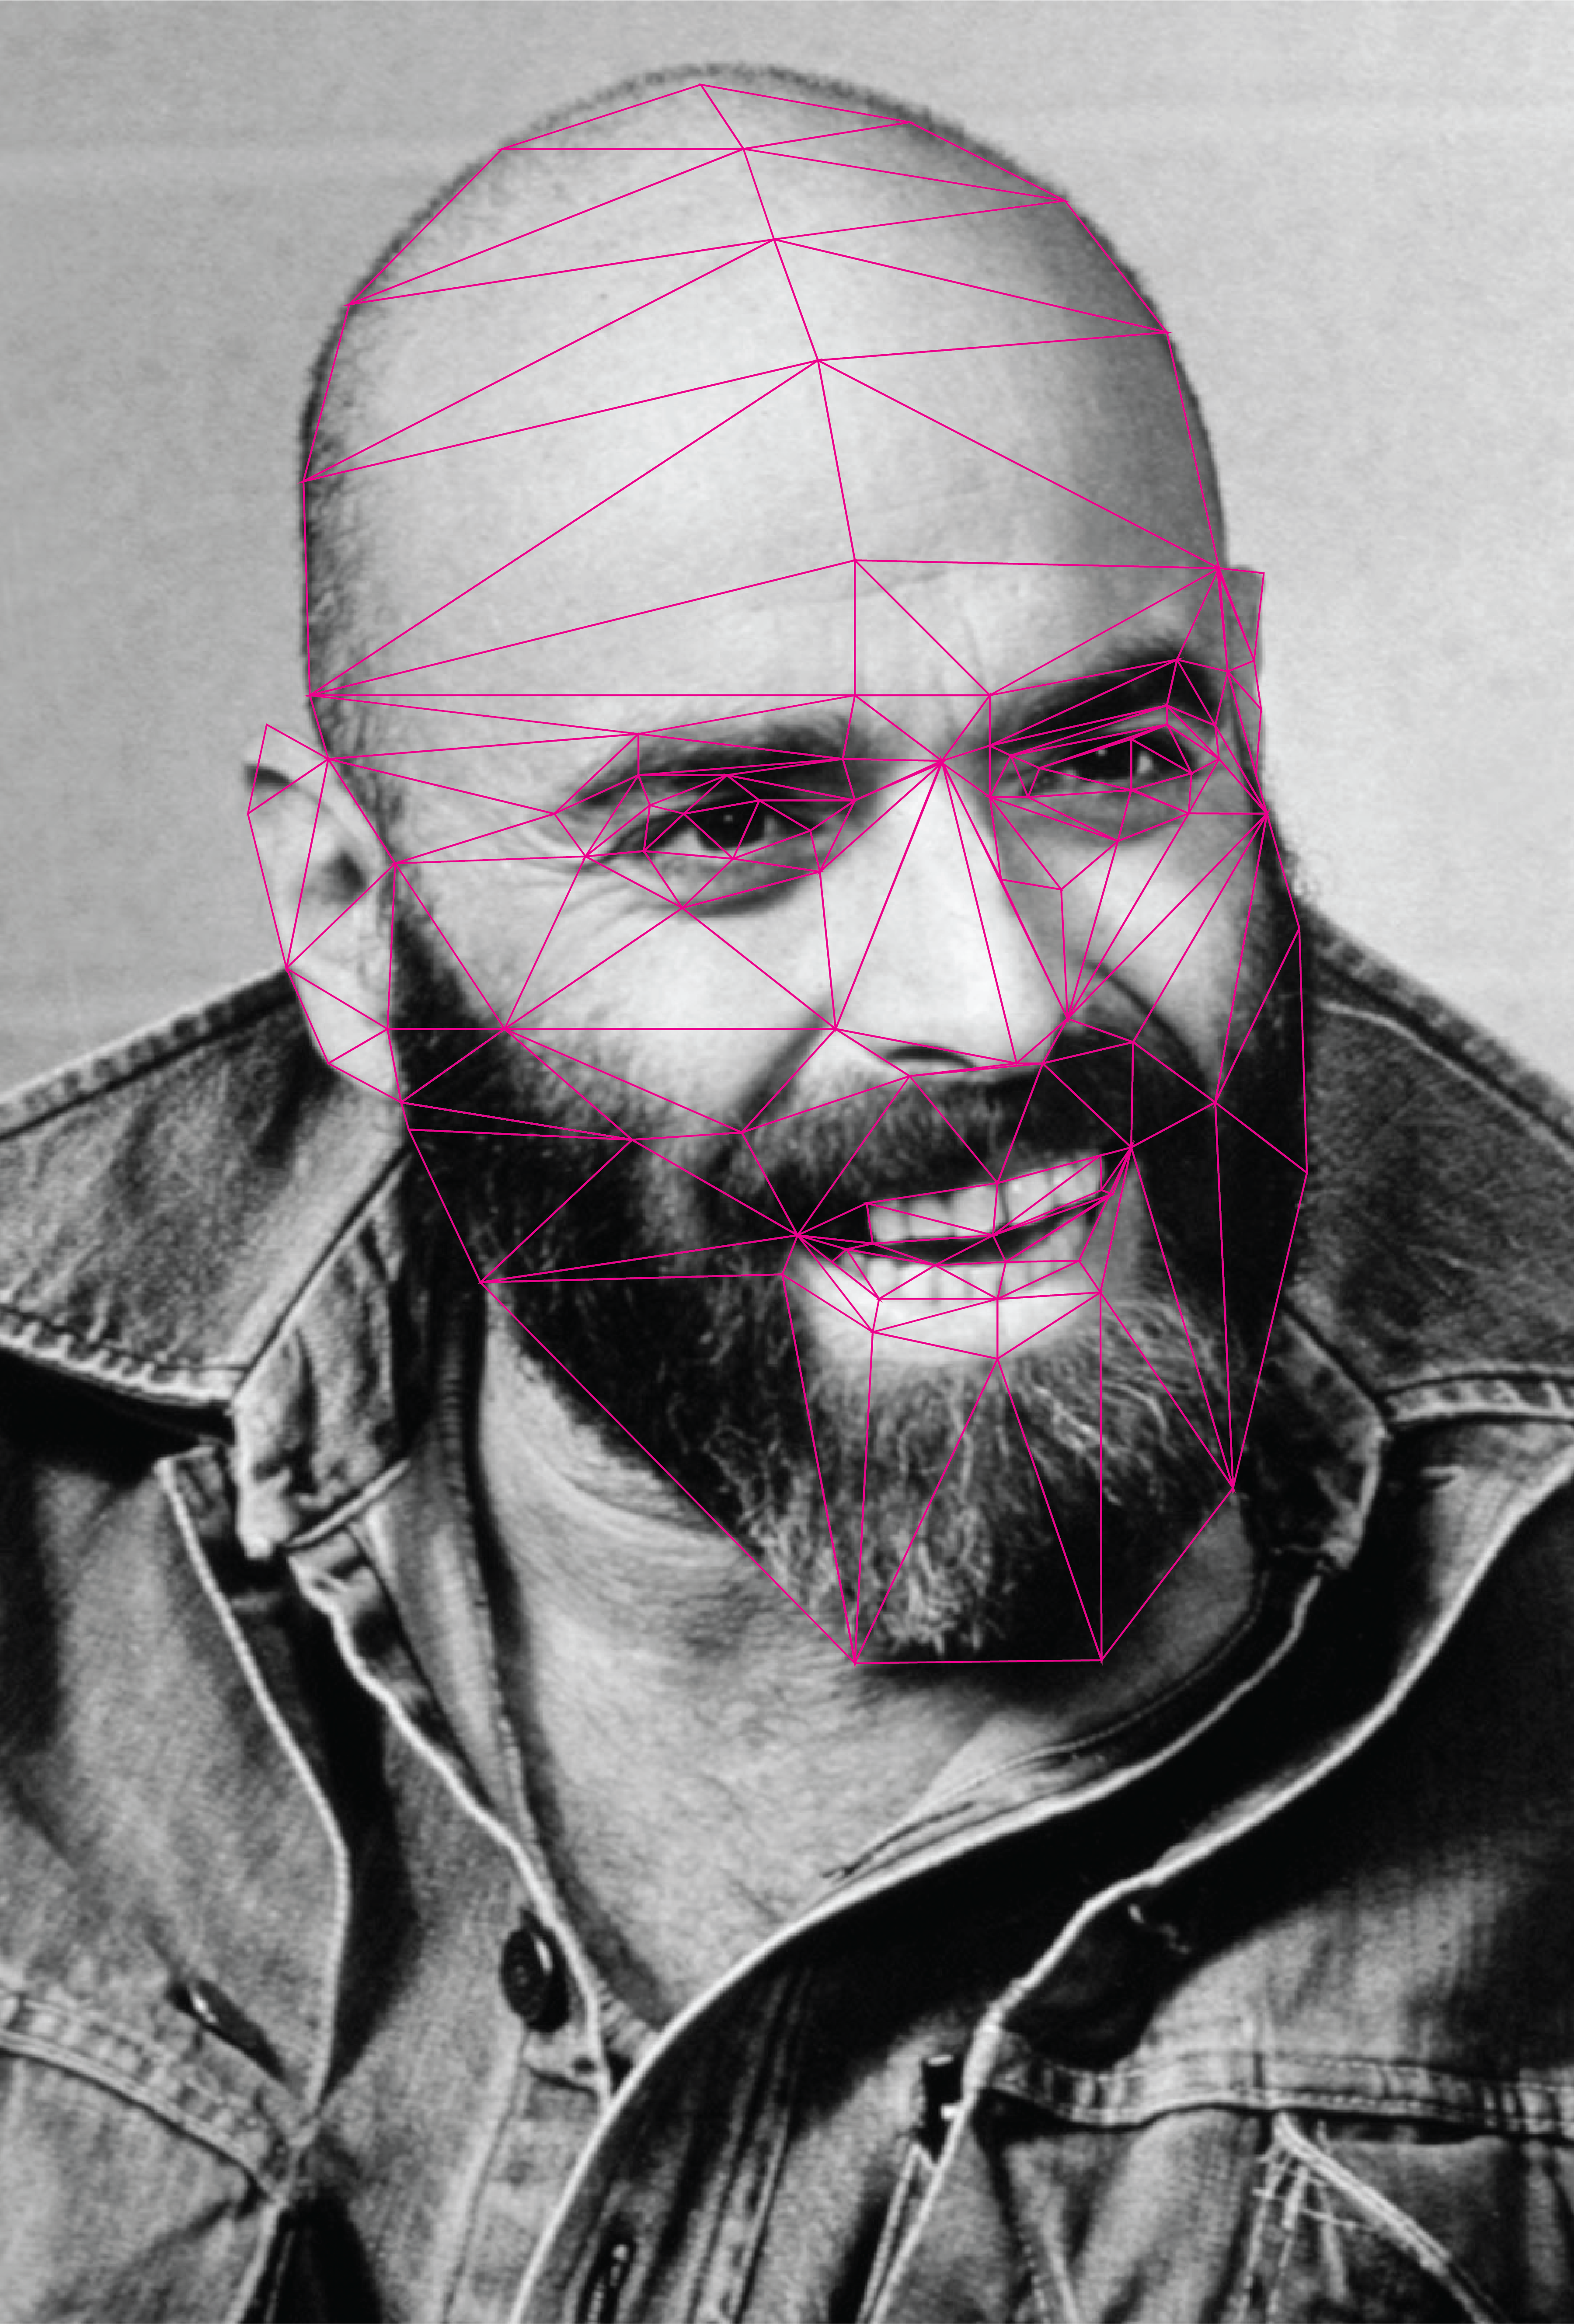 A work-in-progress picture of the Shel portrait. He has magenta lines covering his face in order use triangles to define the shape of his face.